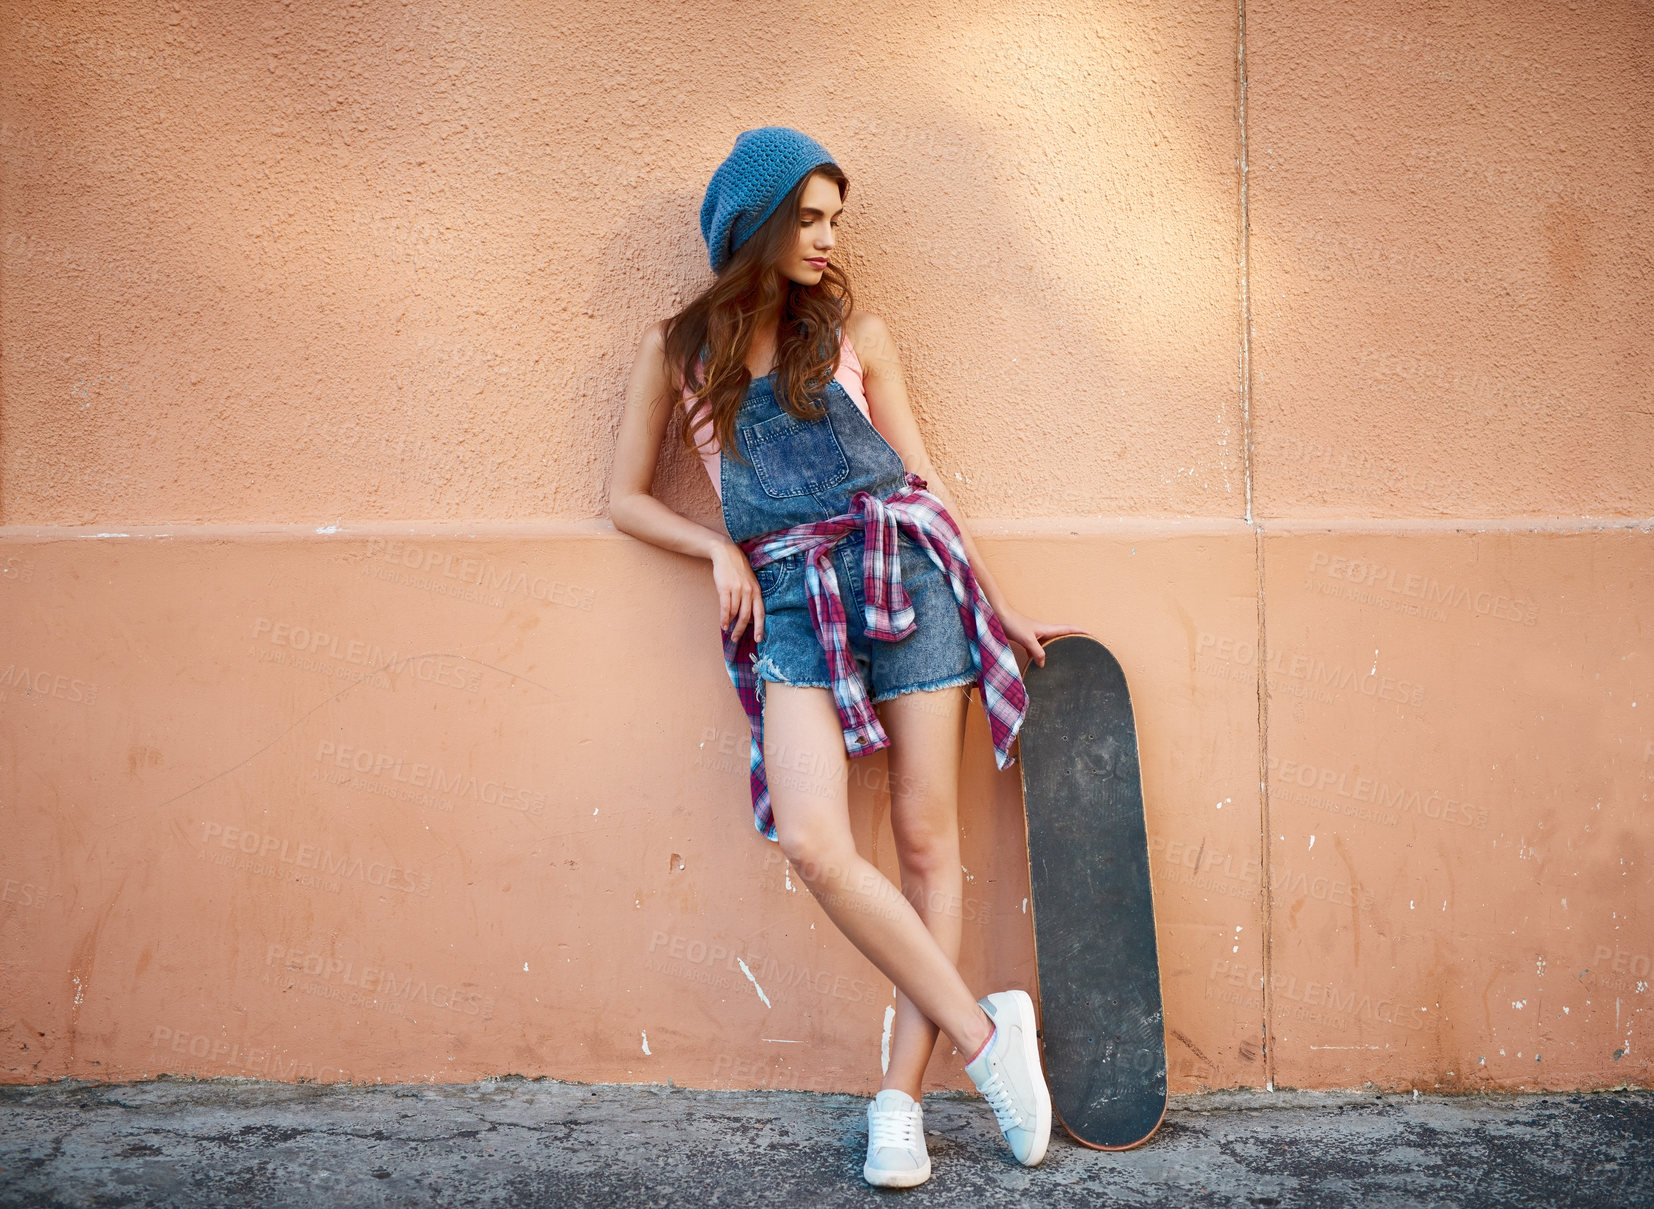 Buy stock photo Shot of a carefree young woman standing with her skateboard against a orange background